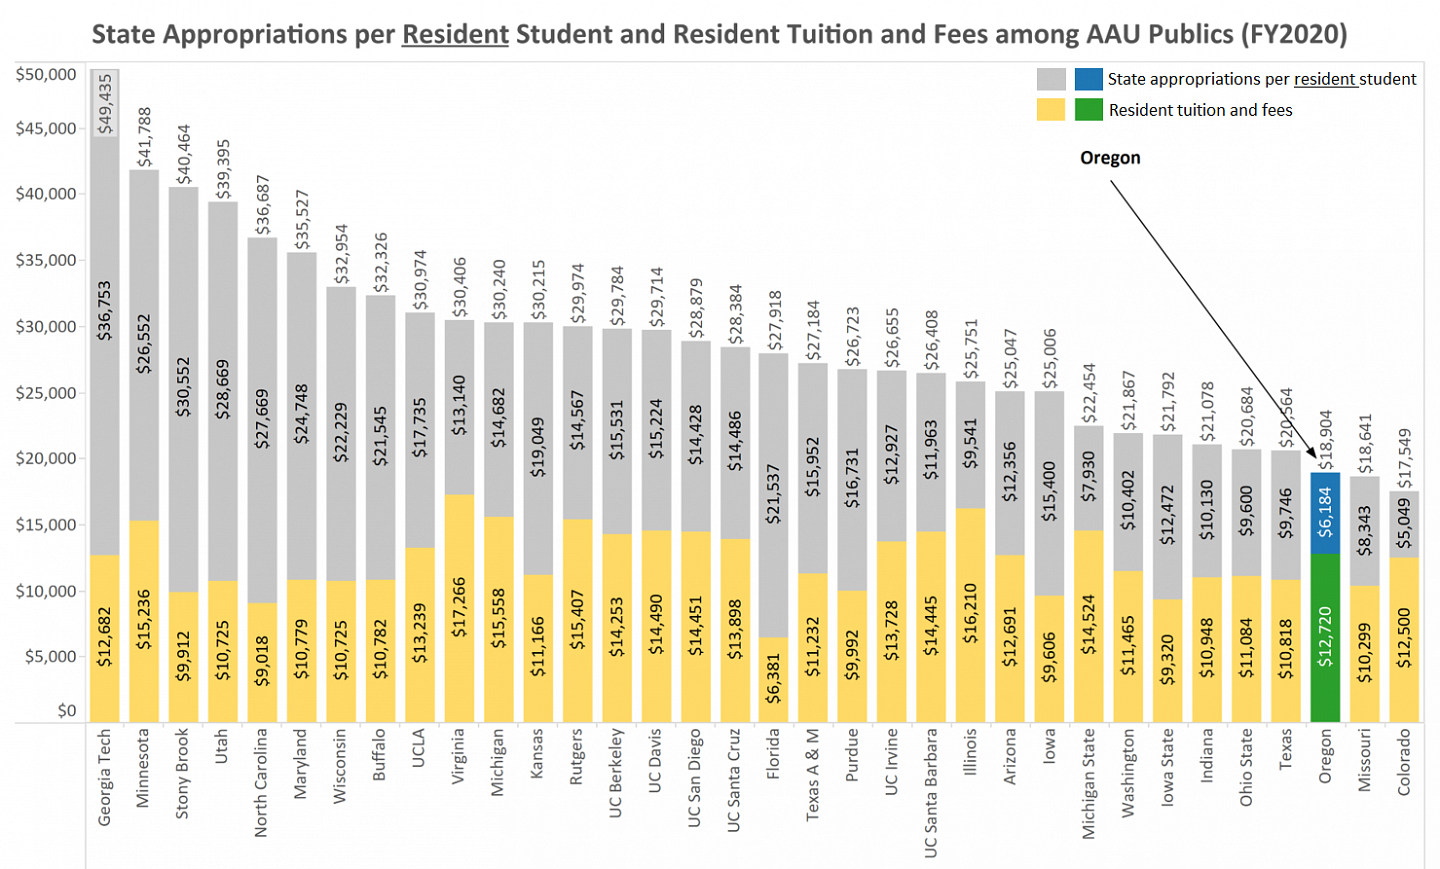 State appropriations per resident student and resident tuition and fees among aau publics fy2020